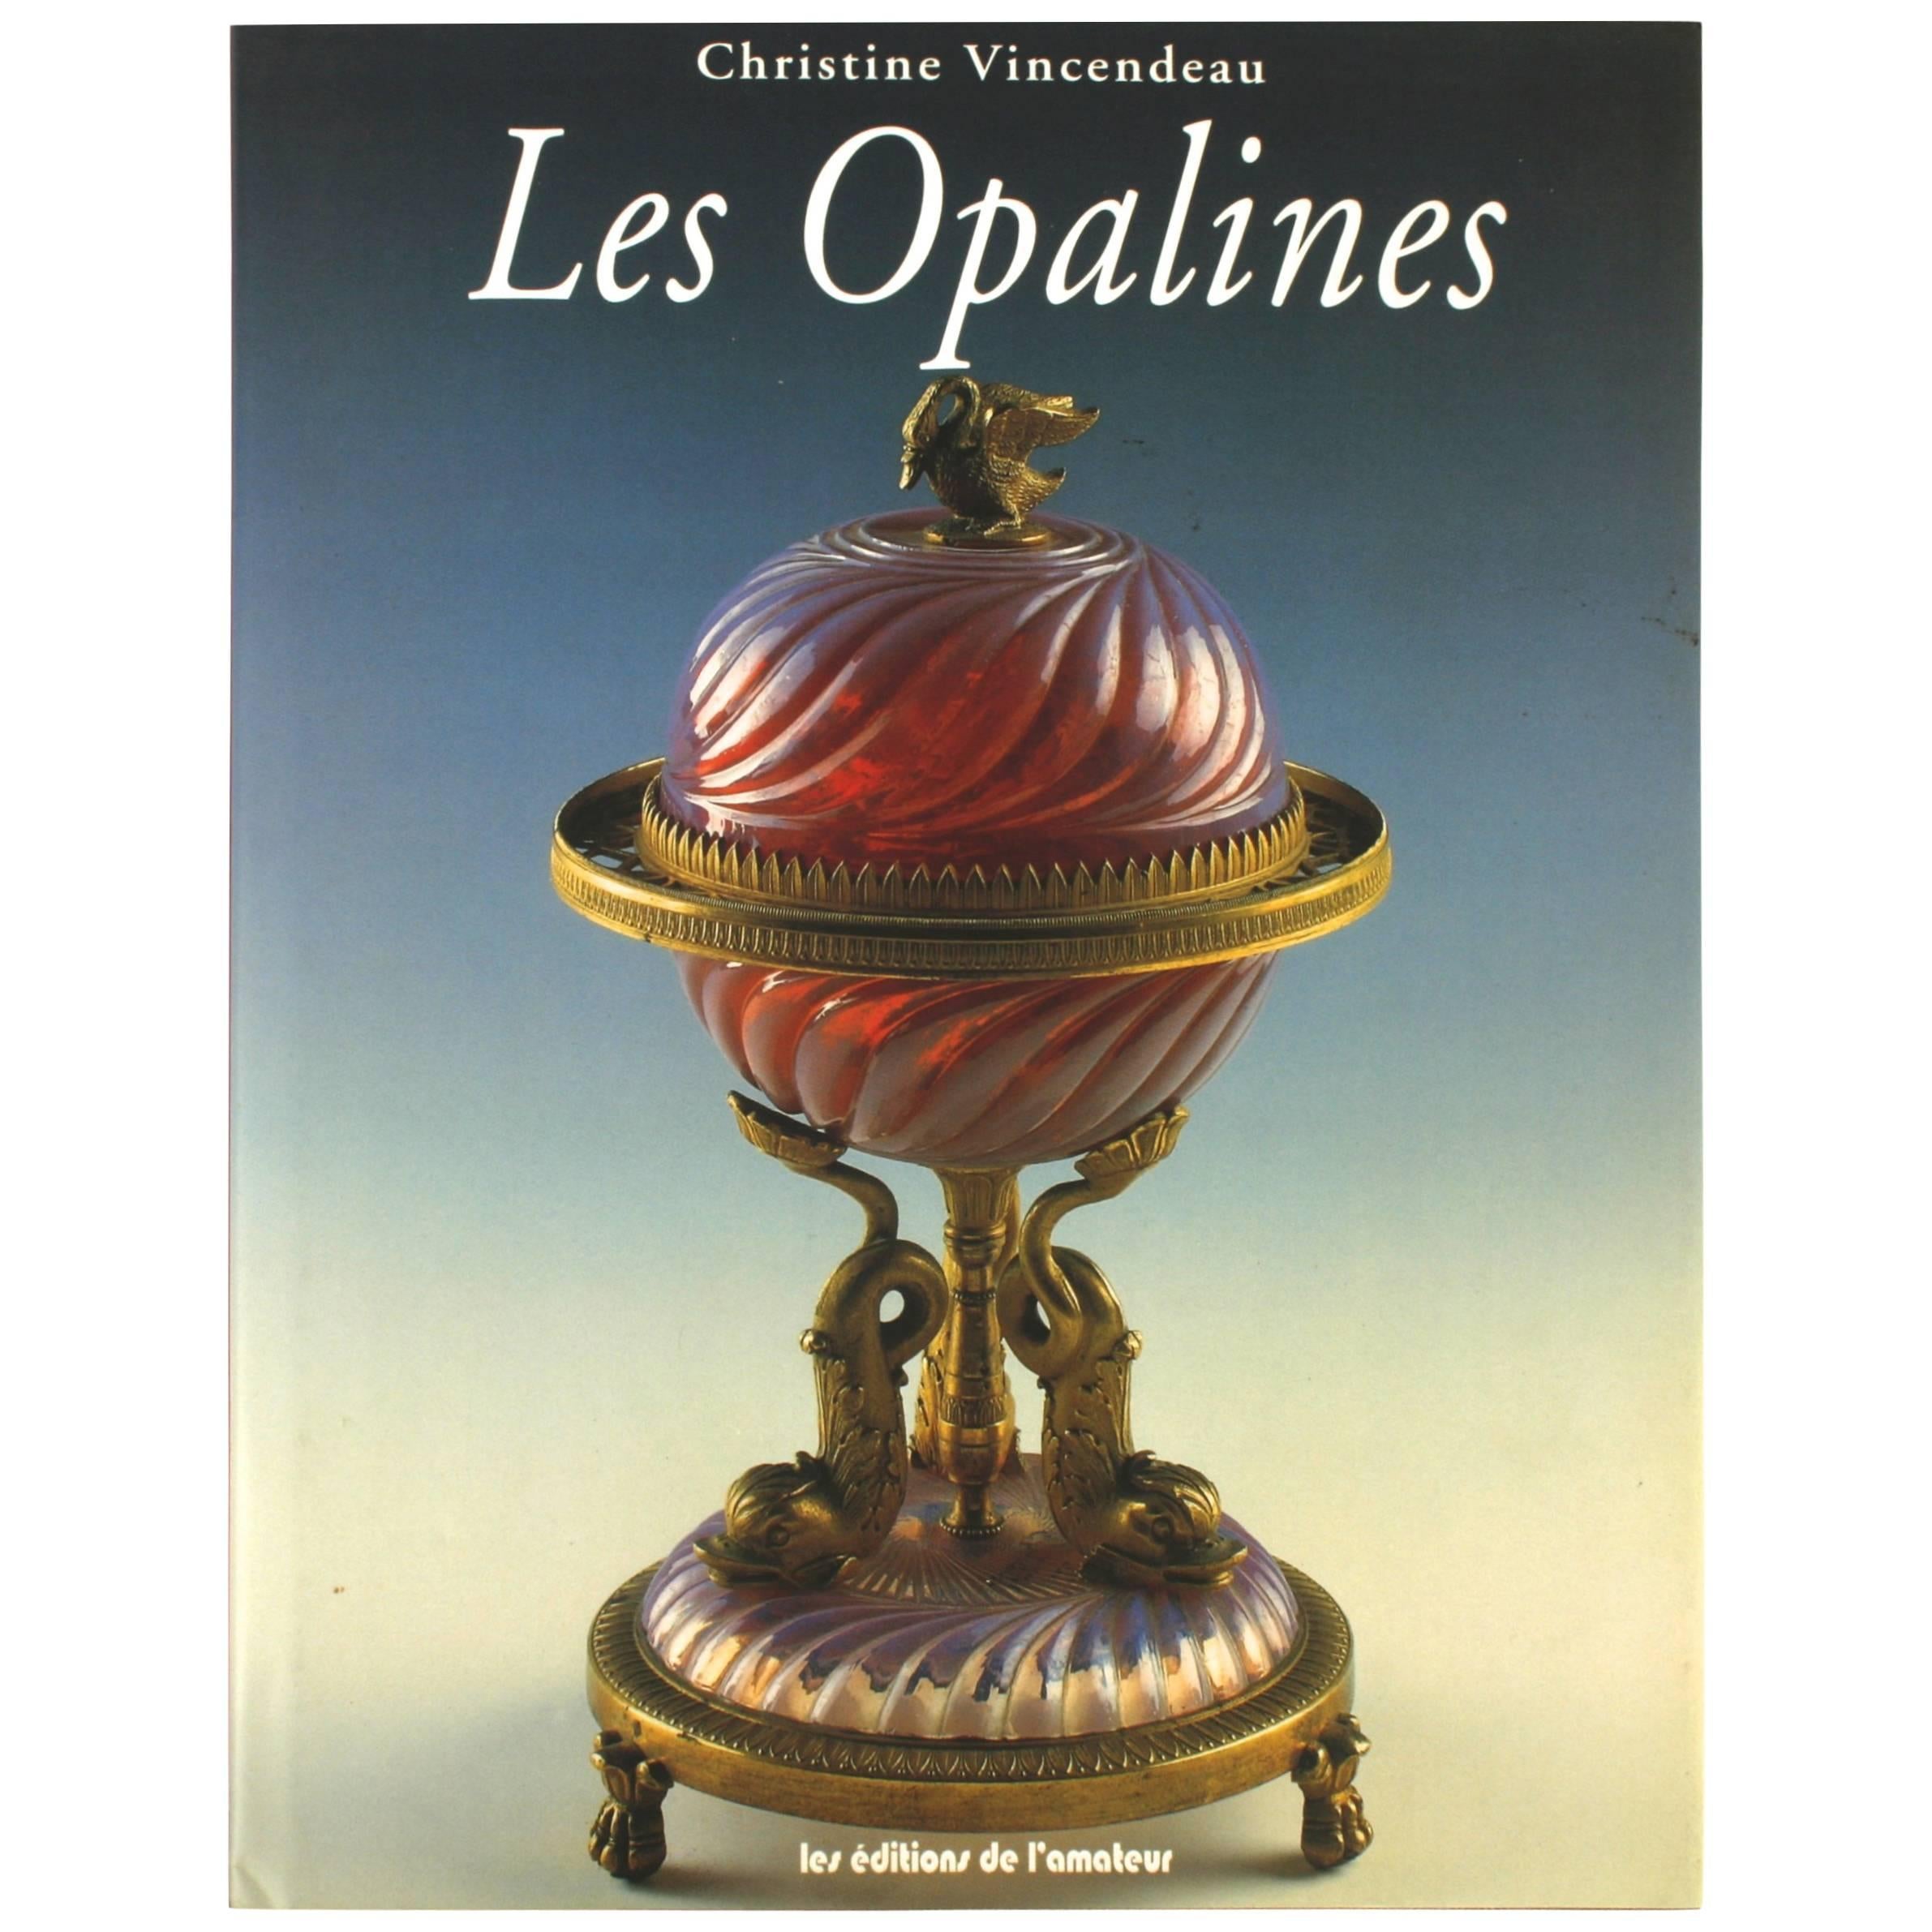 Les Opalines by Christine Vincendeau, First Edition